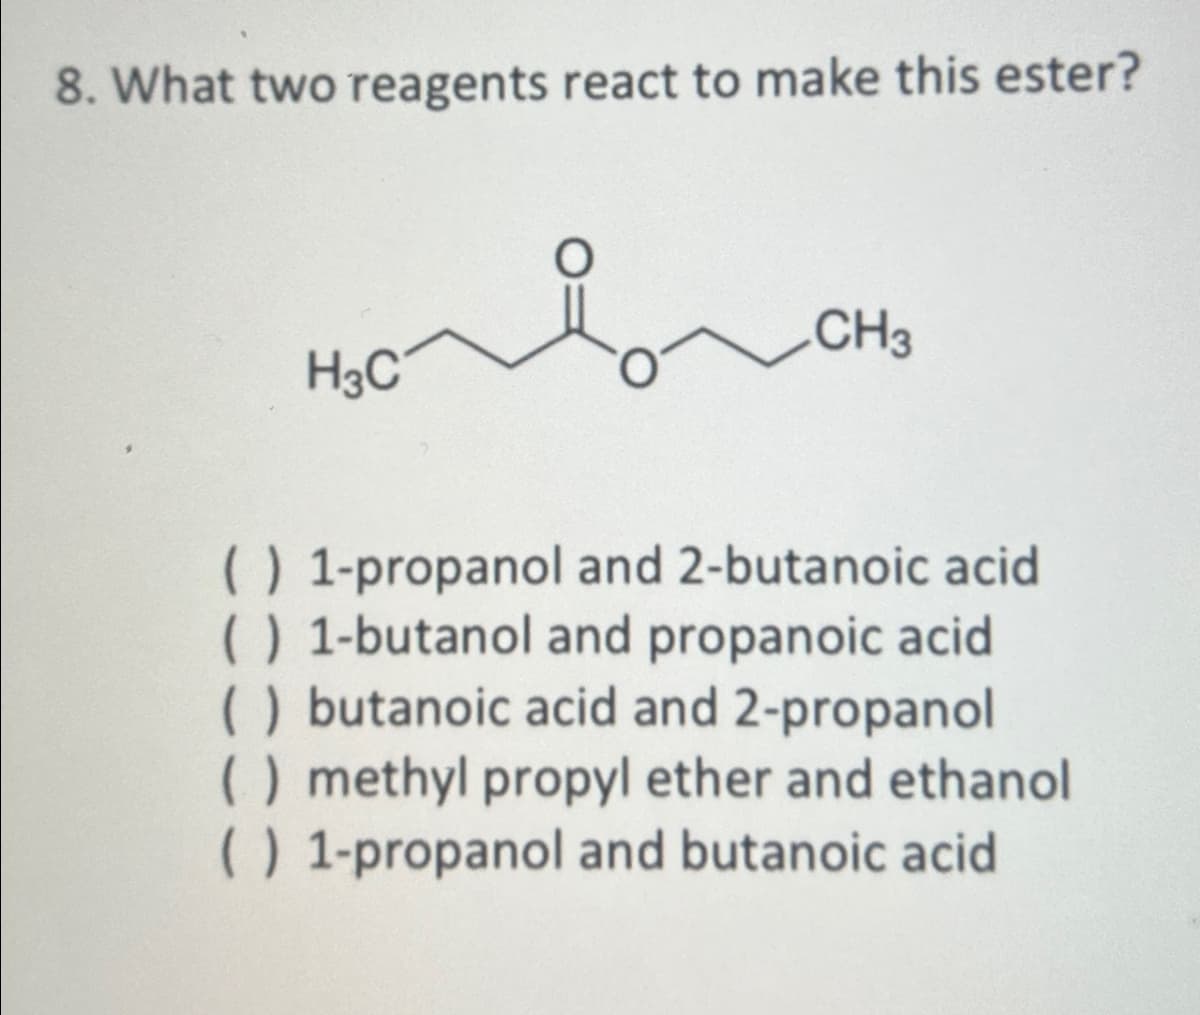 8. What two reagents react to make this ester?
H3C
CH3
( ) 1-propanol and 2-butanoic acid
( ) 1-butanol and propanoic acid
( ) butanoic acid and 2-propanol
() methyl propyl ether and ethanol
( ) 1-propanol and butanoic acid